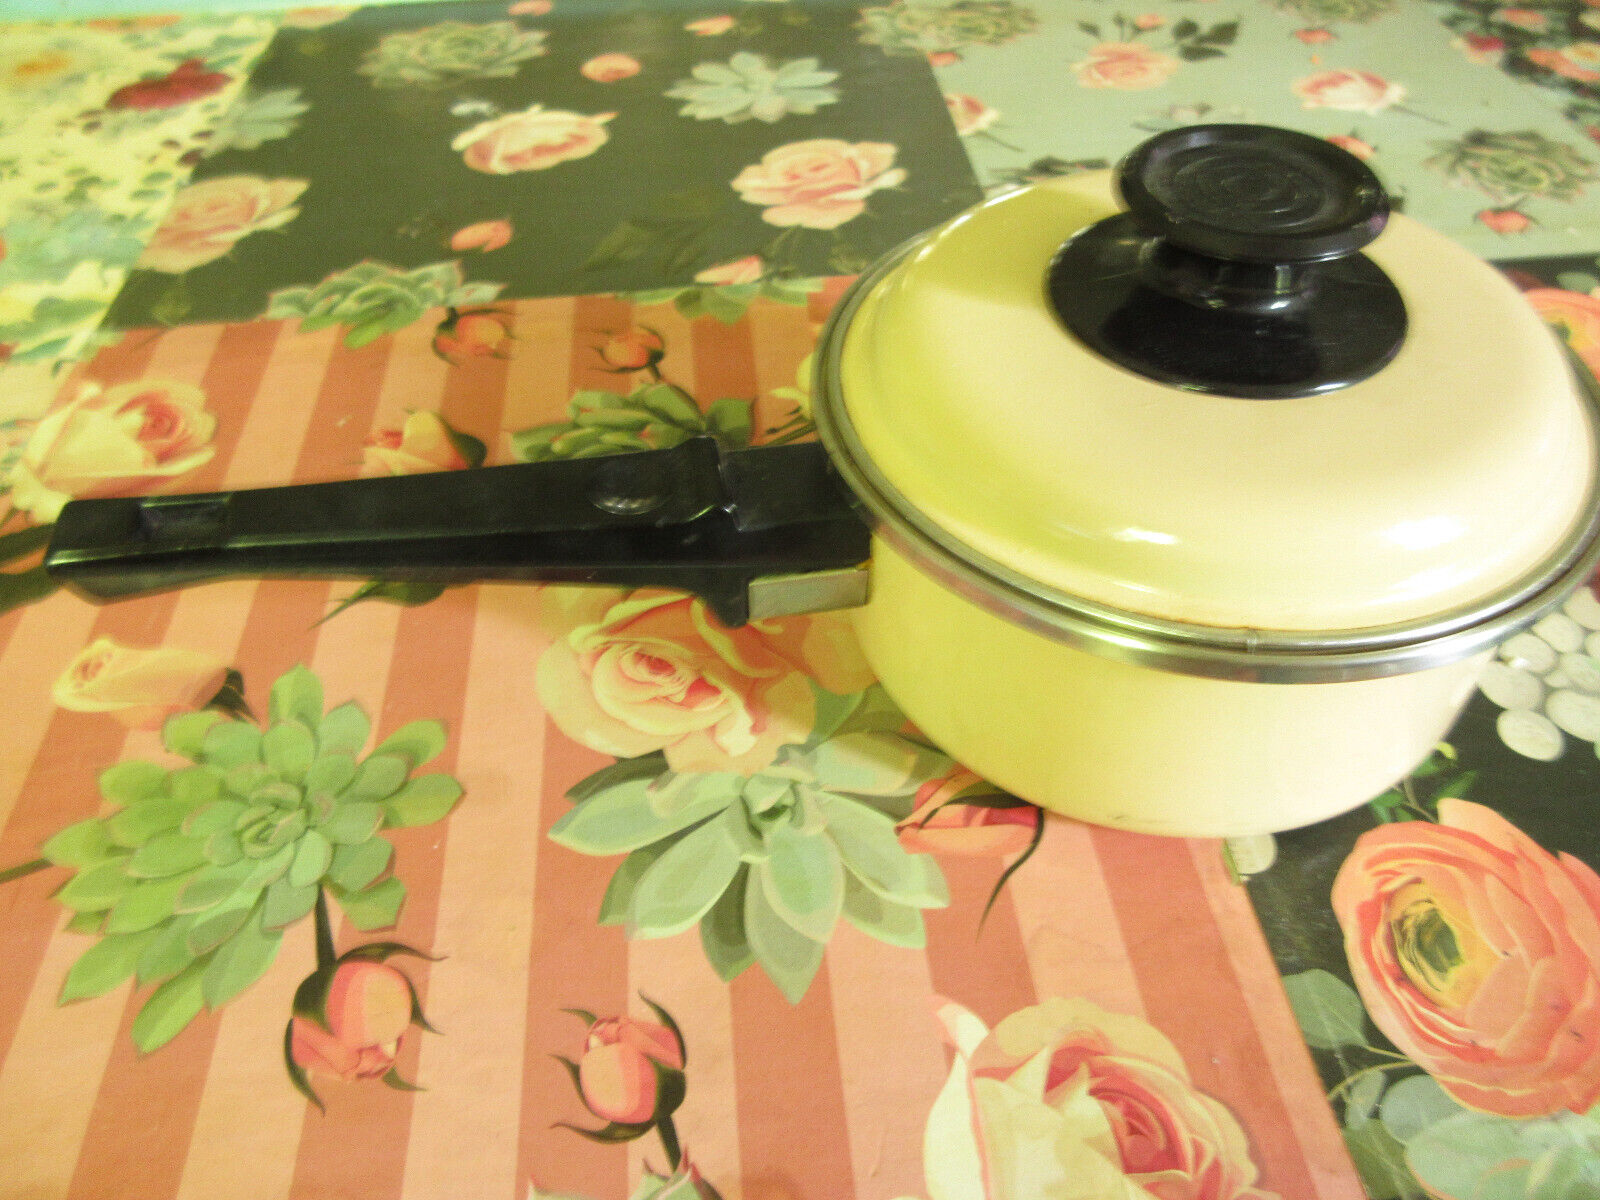 VINTAGE 70s-80s YELLOW SMALL 1 QUART SAUCEPAN POT WITH LID